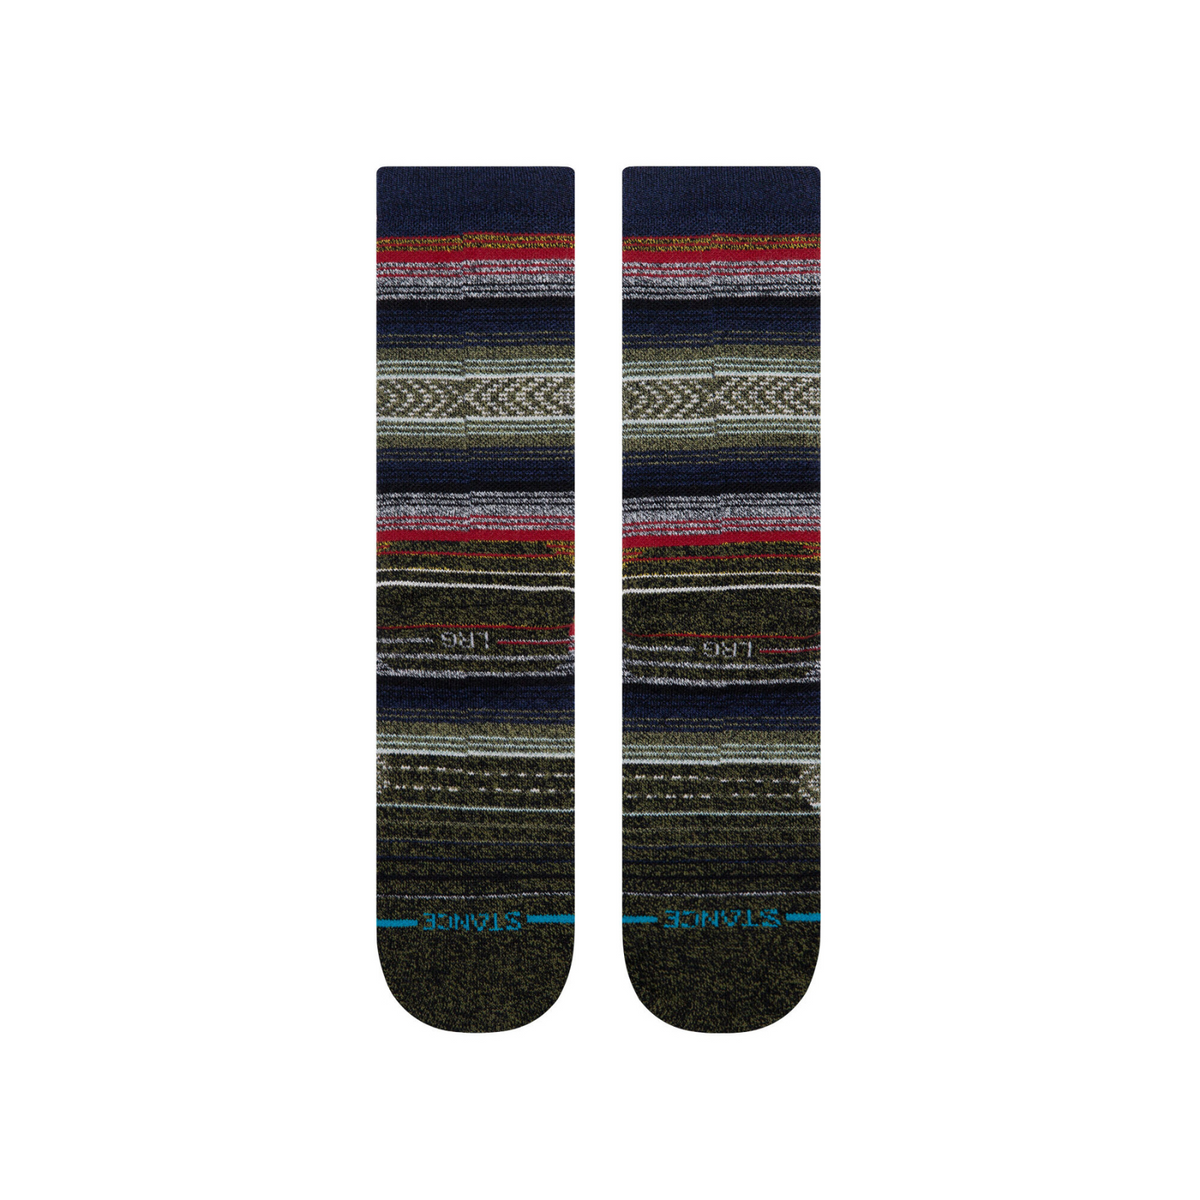 Bottom of Stance Windy Peak Hike medium cushion men&#39;s sock featuring green, black, white and red stripes